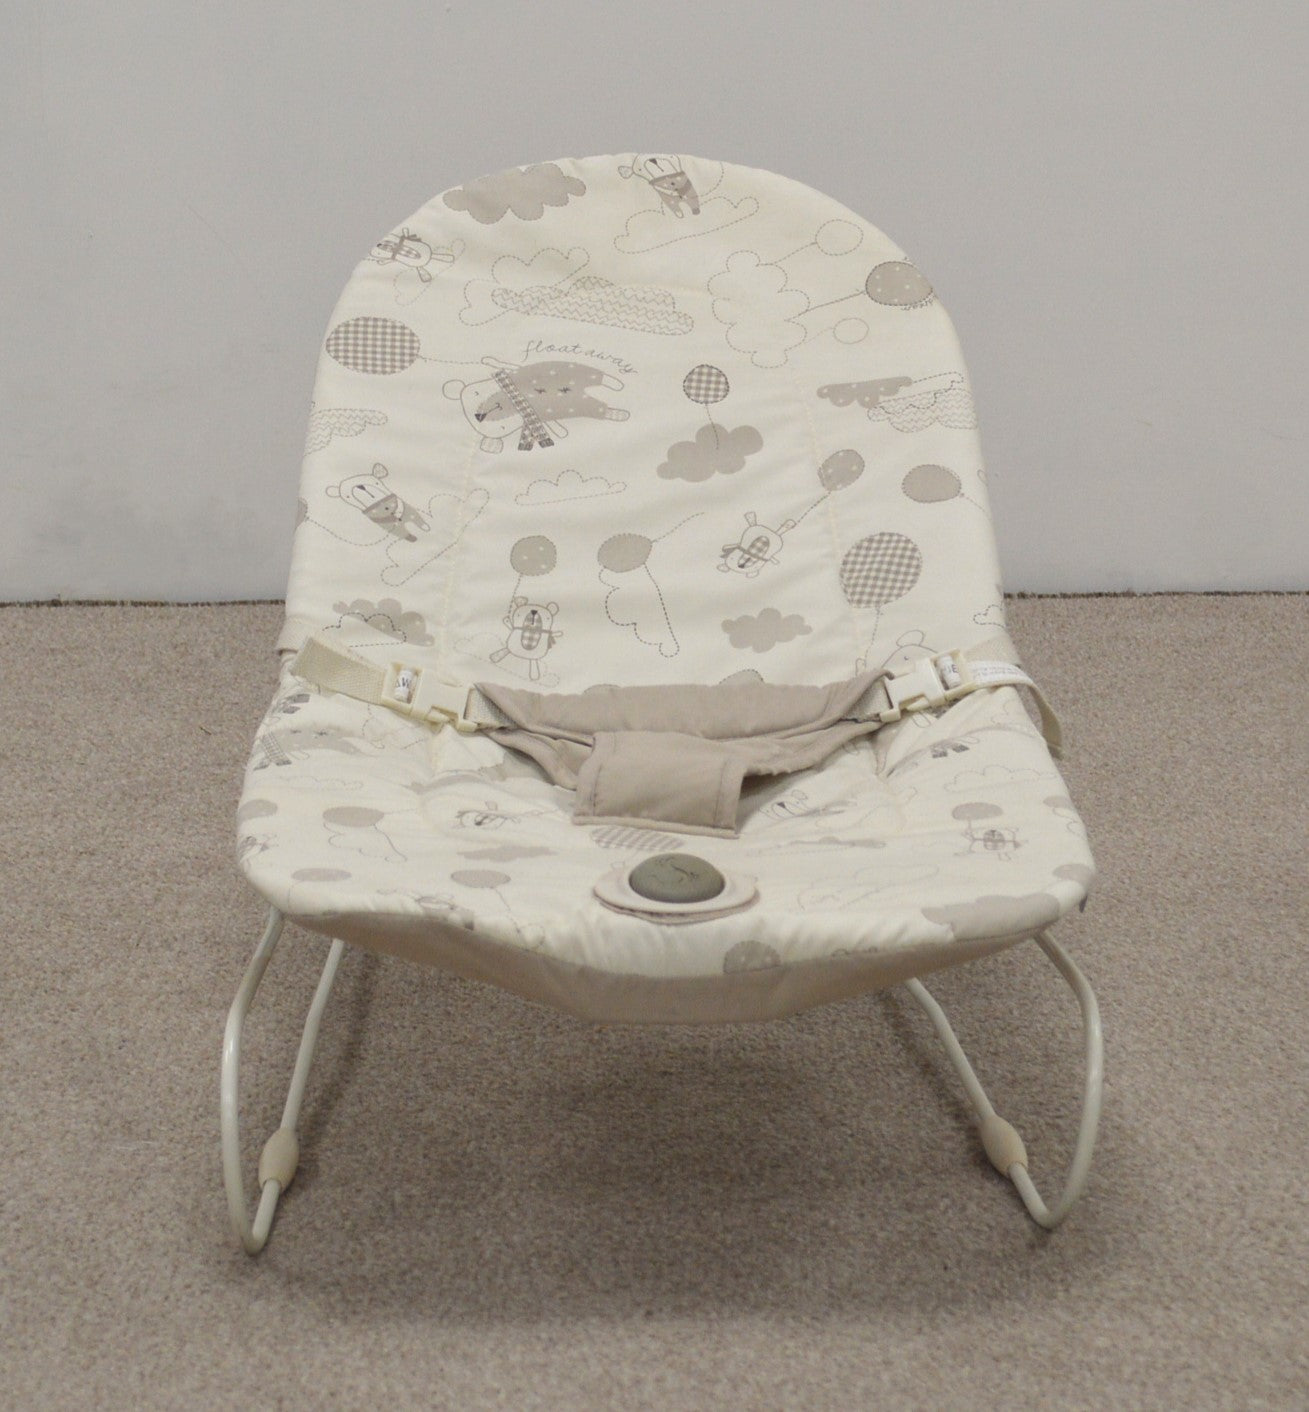 Baby Bouncer by Mamas and Papas